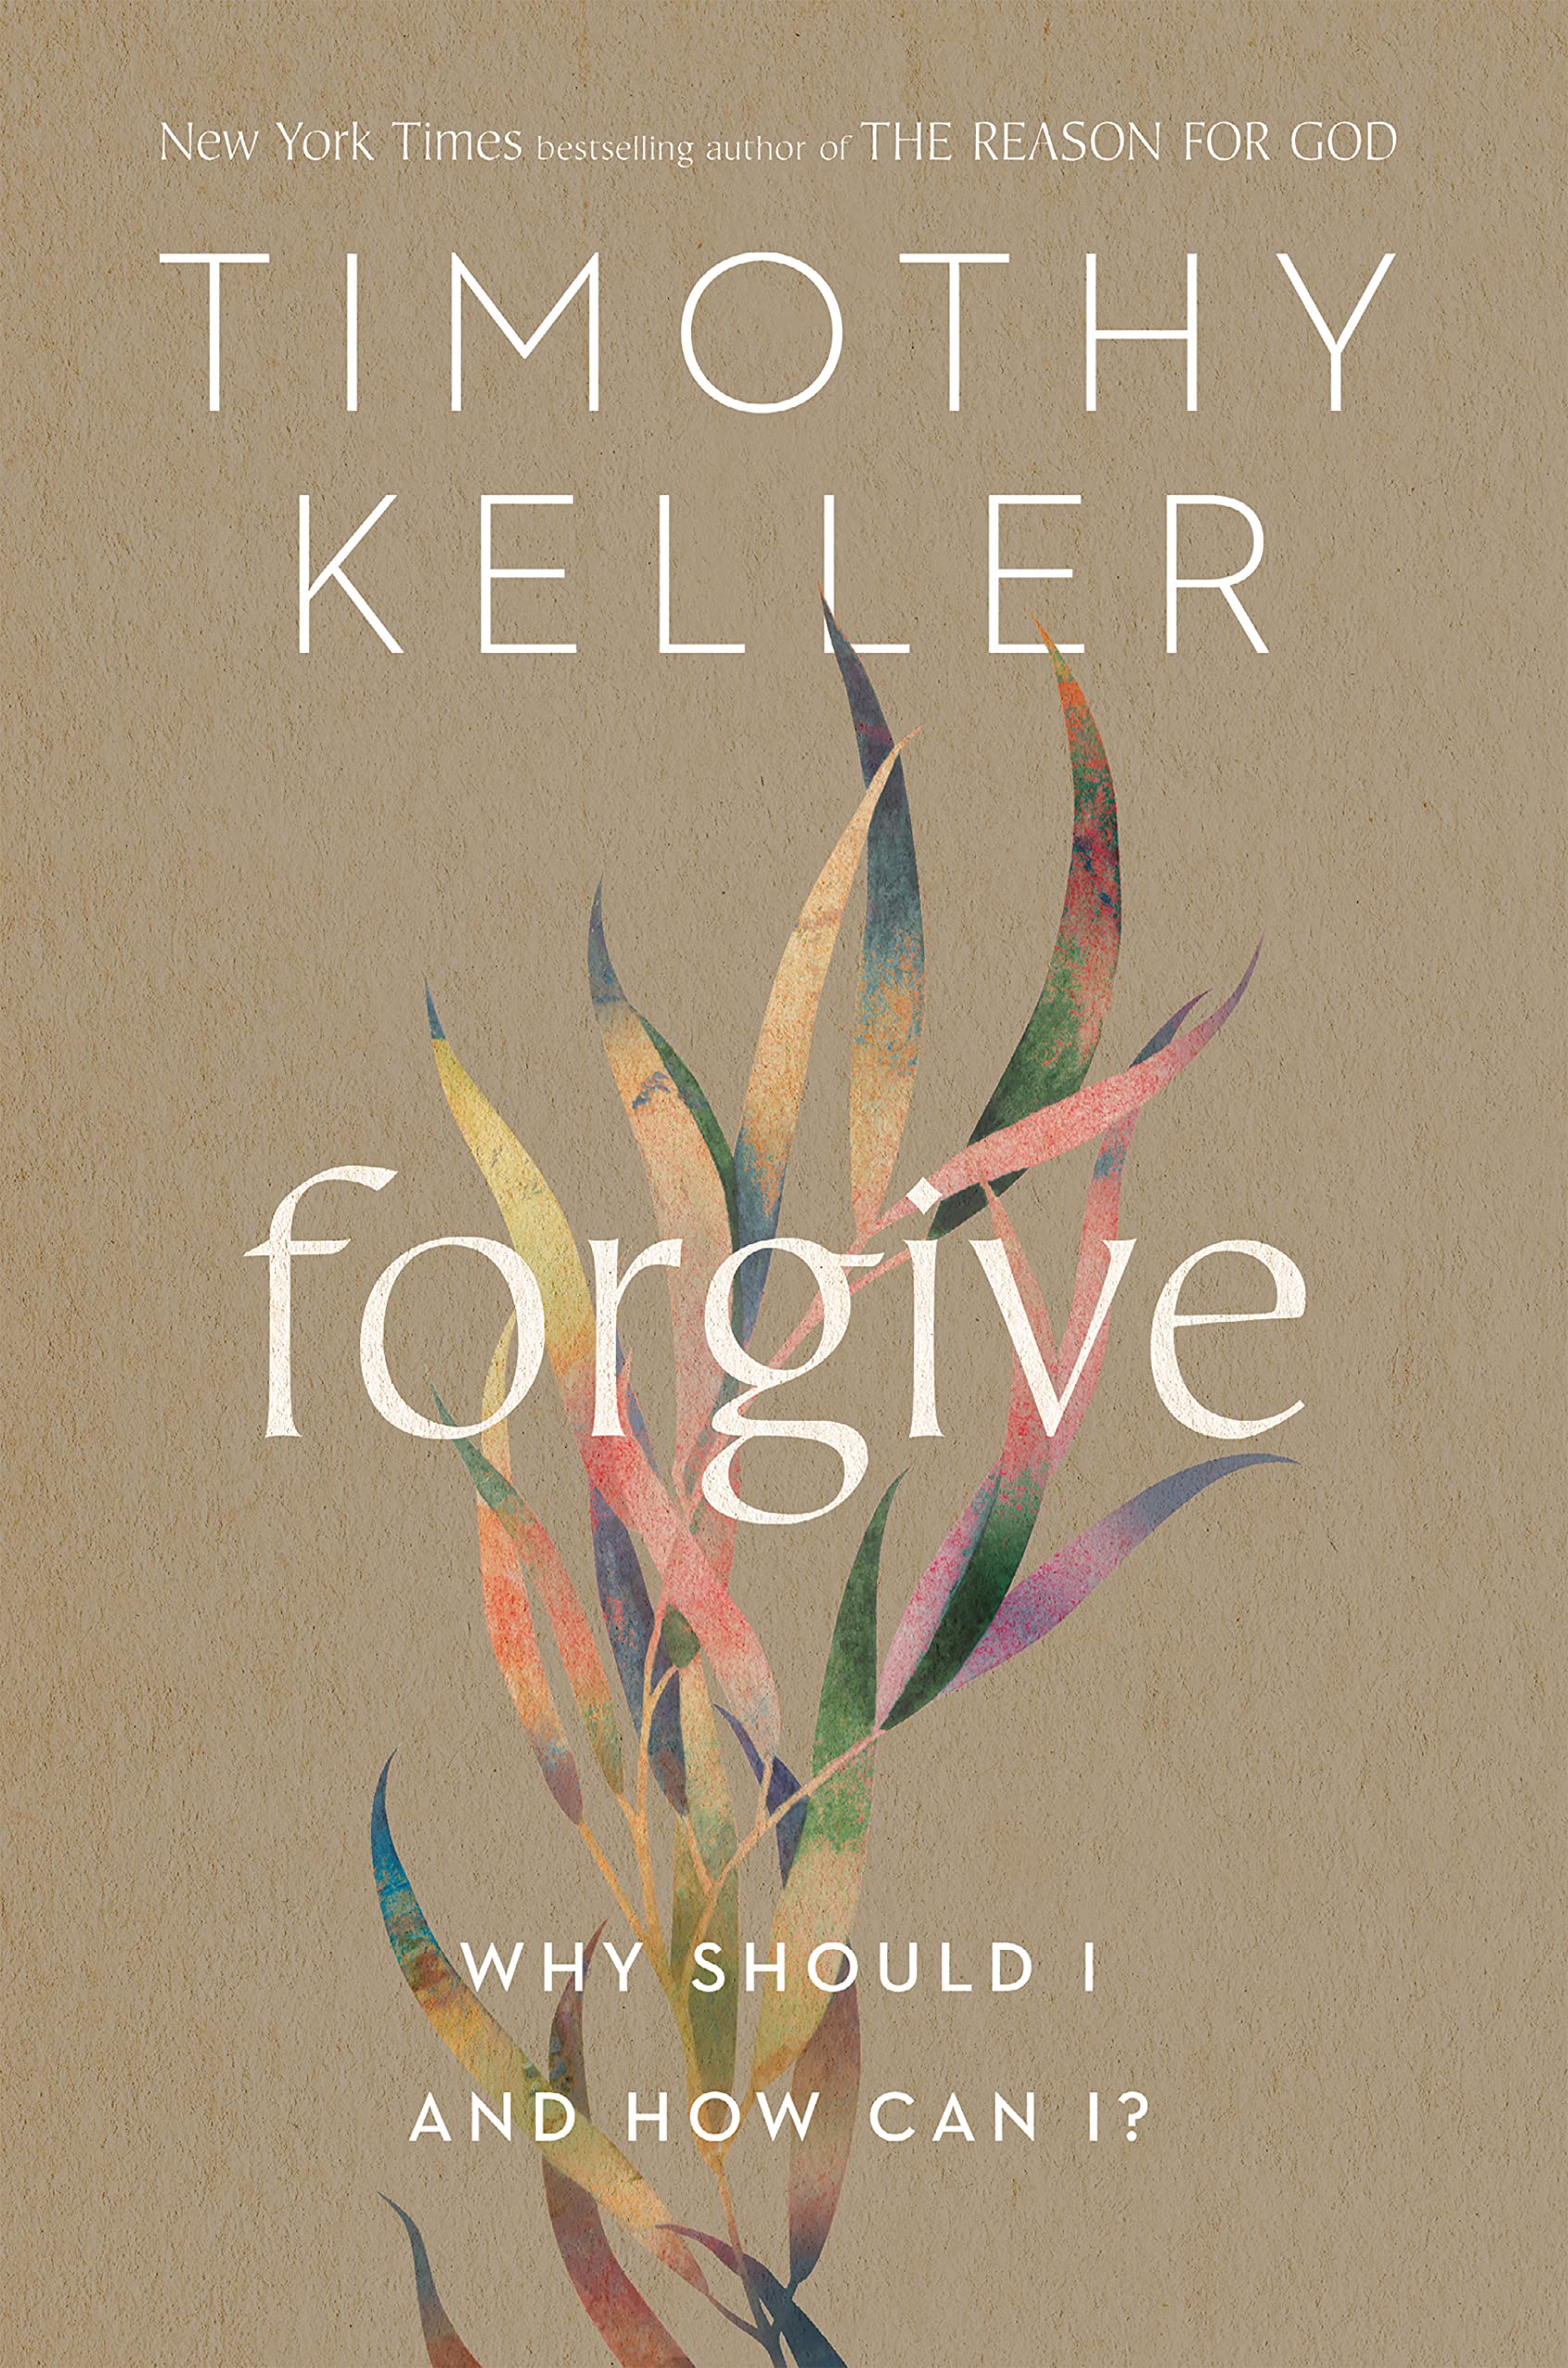 Forgive: Why Should I and How Can I? (Hardcover)